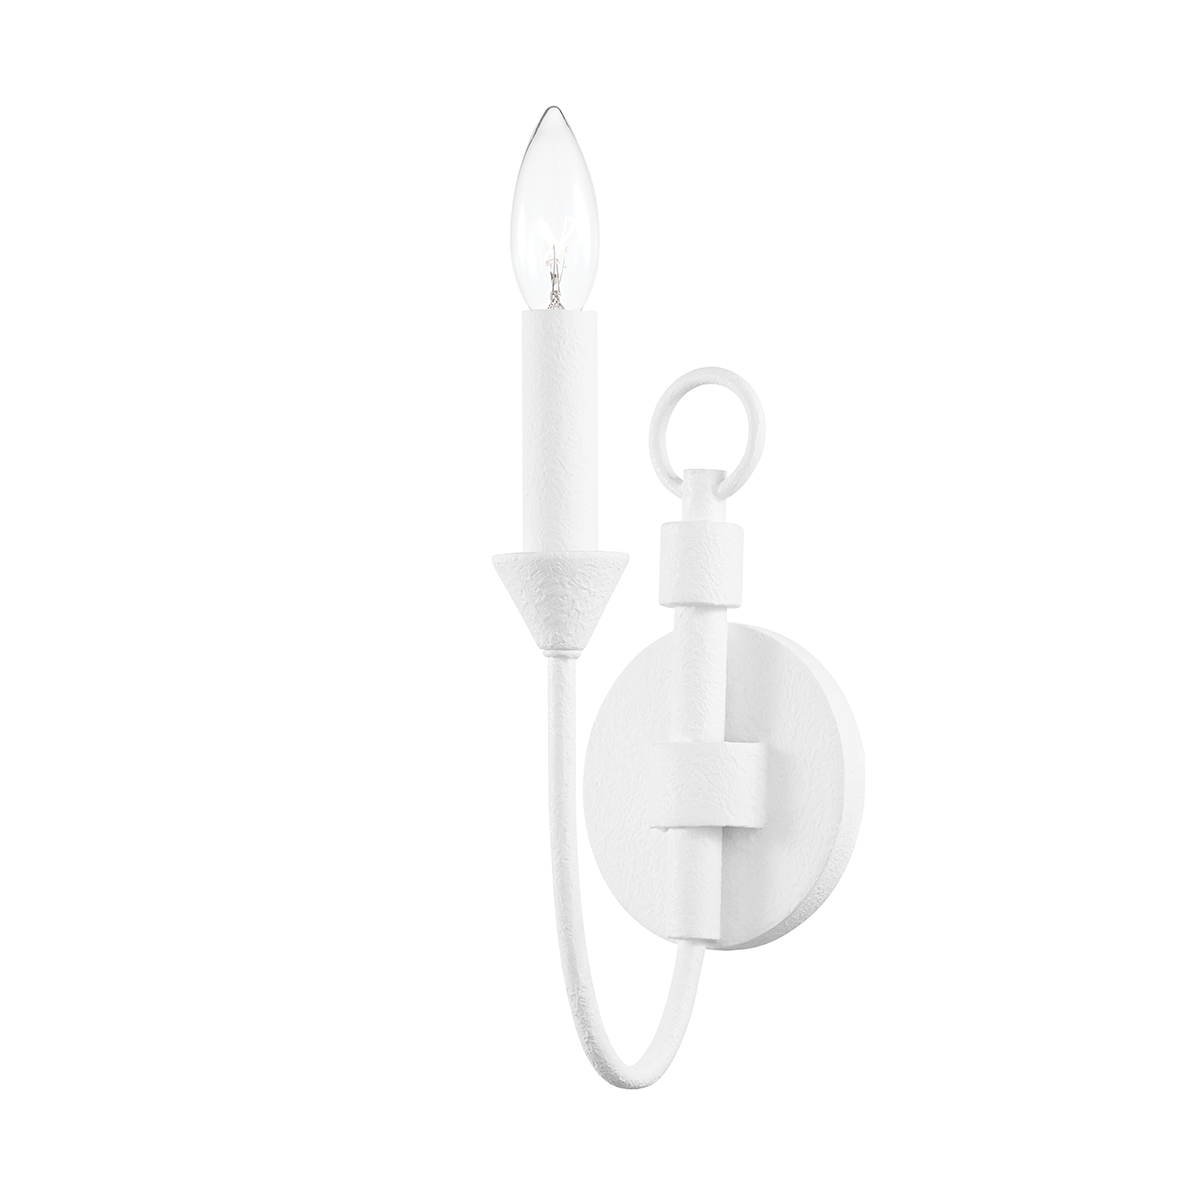 Troy Lighting Cate Wall Sconce Wall Sconce Troy Lighting GESSO WHITE 4.5x4.5x14 